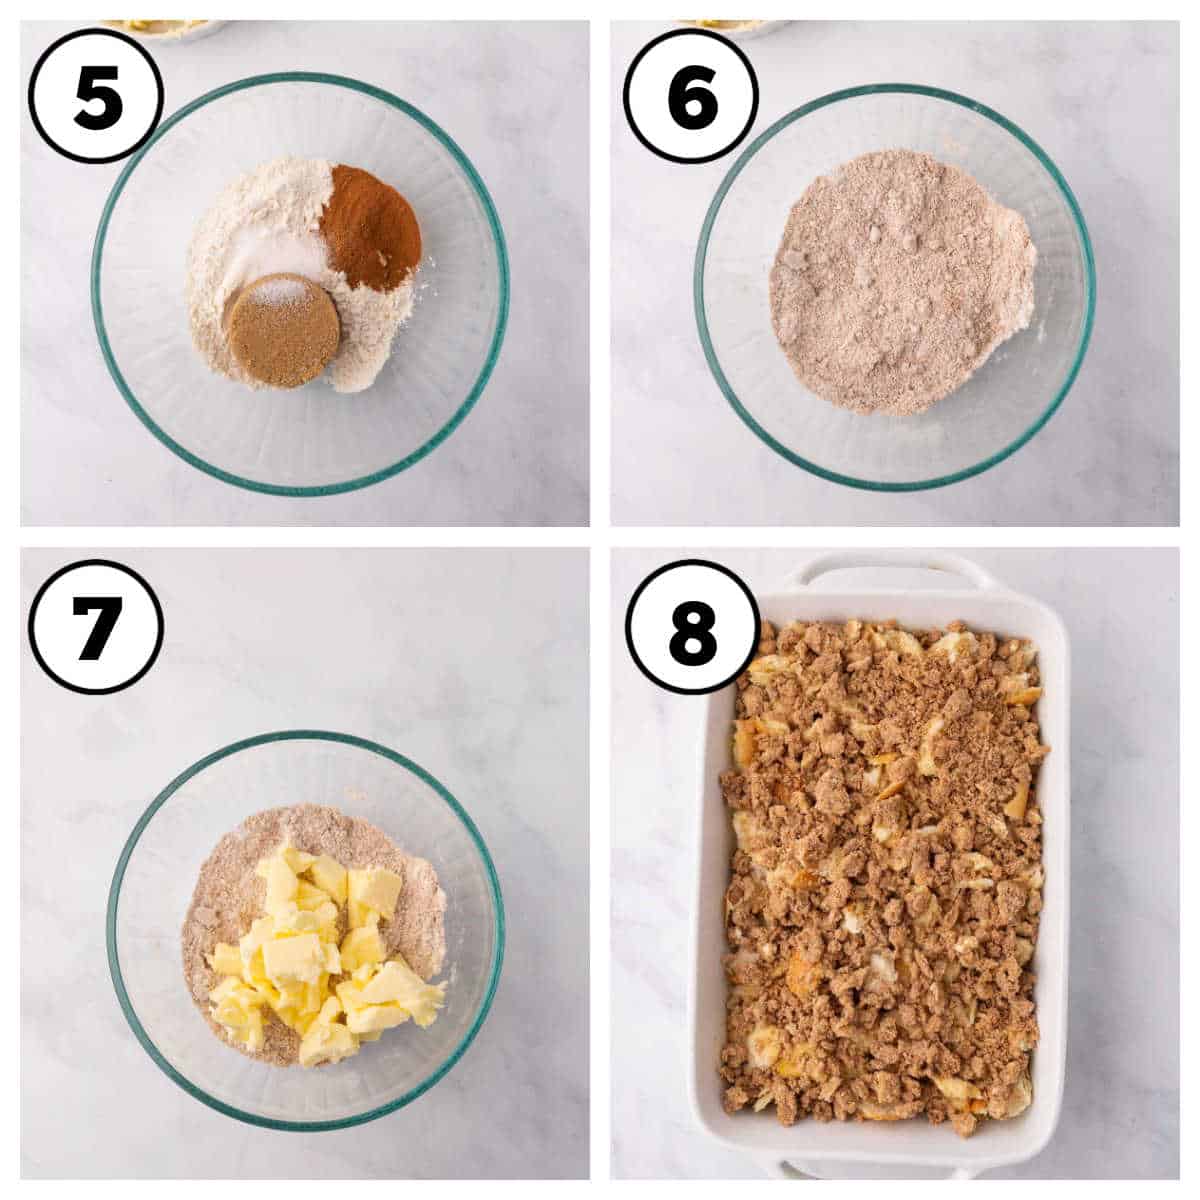 Steps 5-8 of how to make French toast bake.